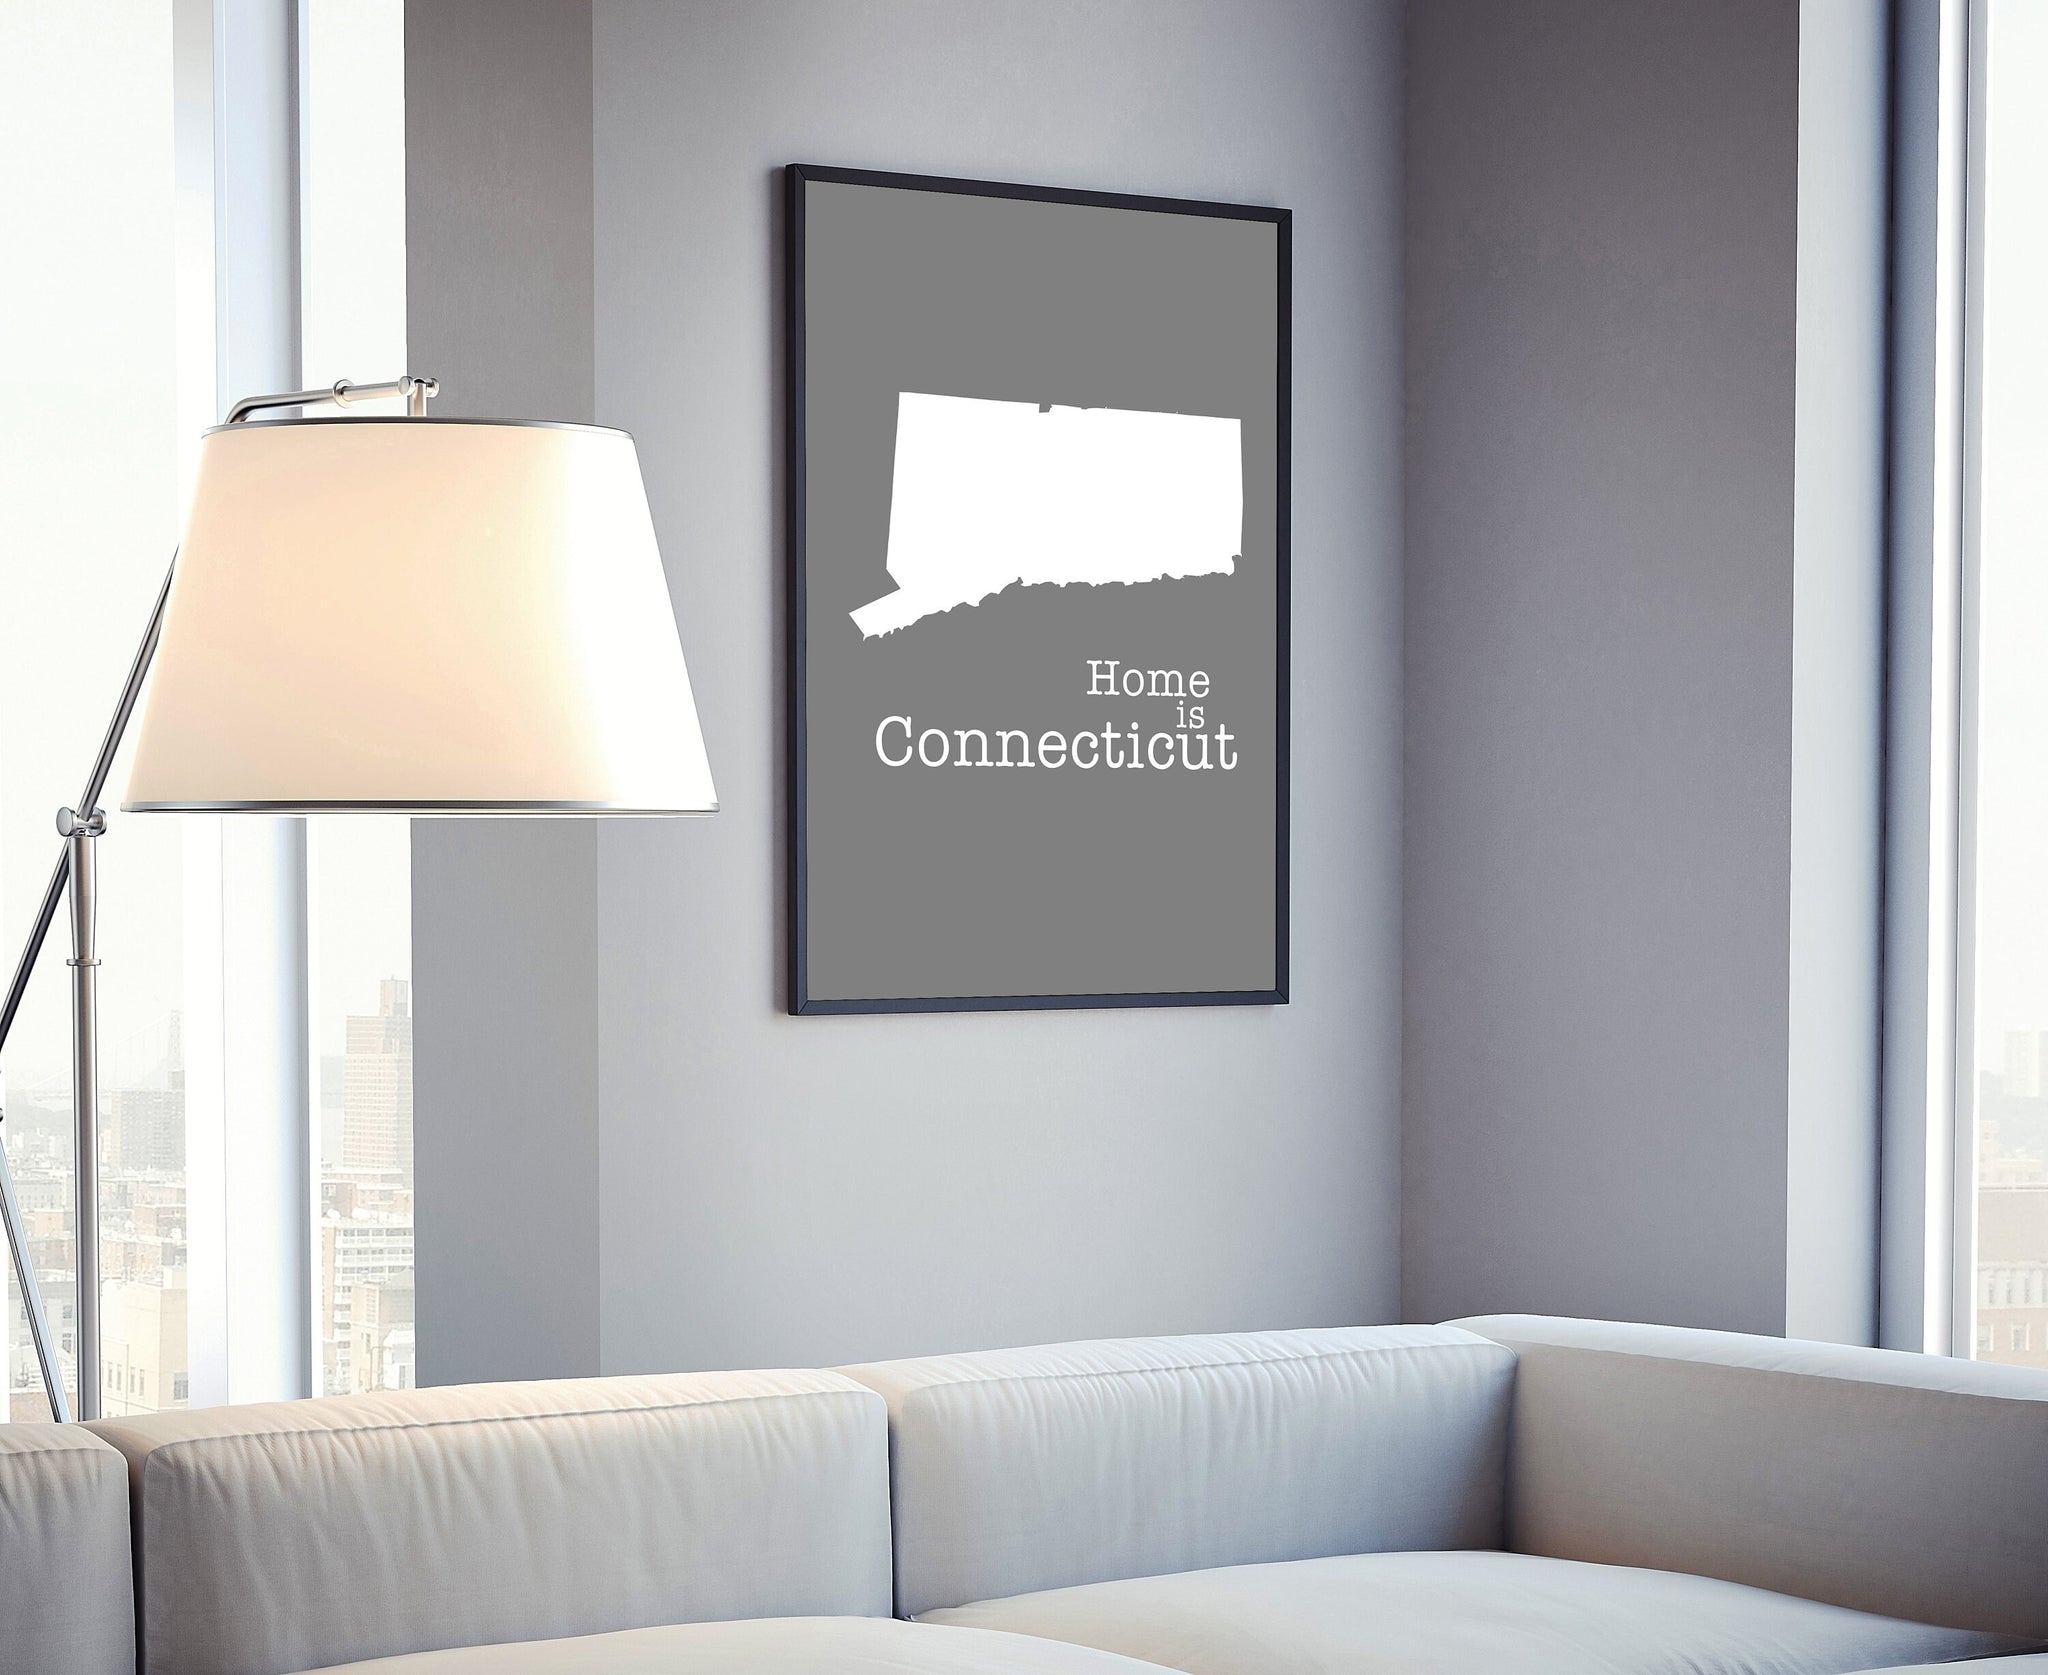 Connecticut Map Wall Art, Connecticut Map Wall Decor, City Map Poster Print, Connecticut State Poster, Home wall decor, Office wall decor